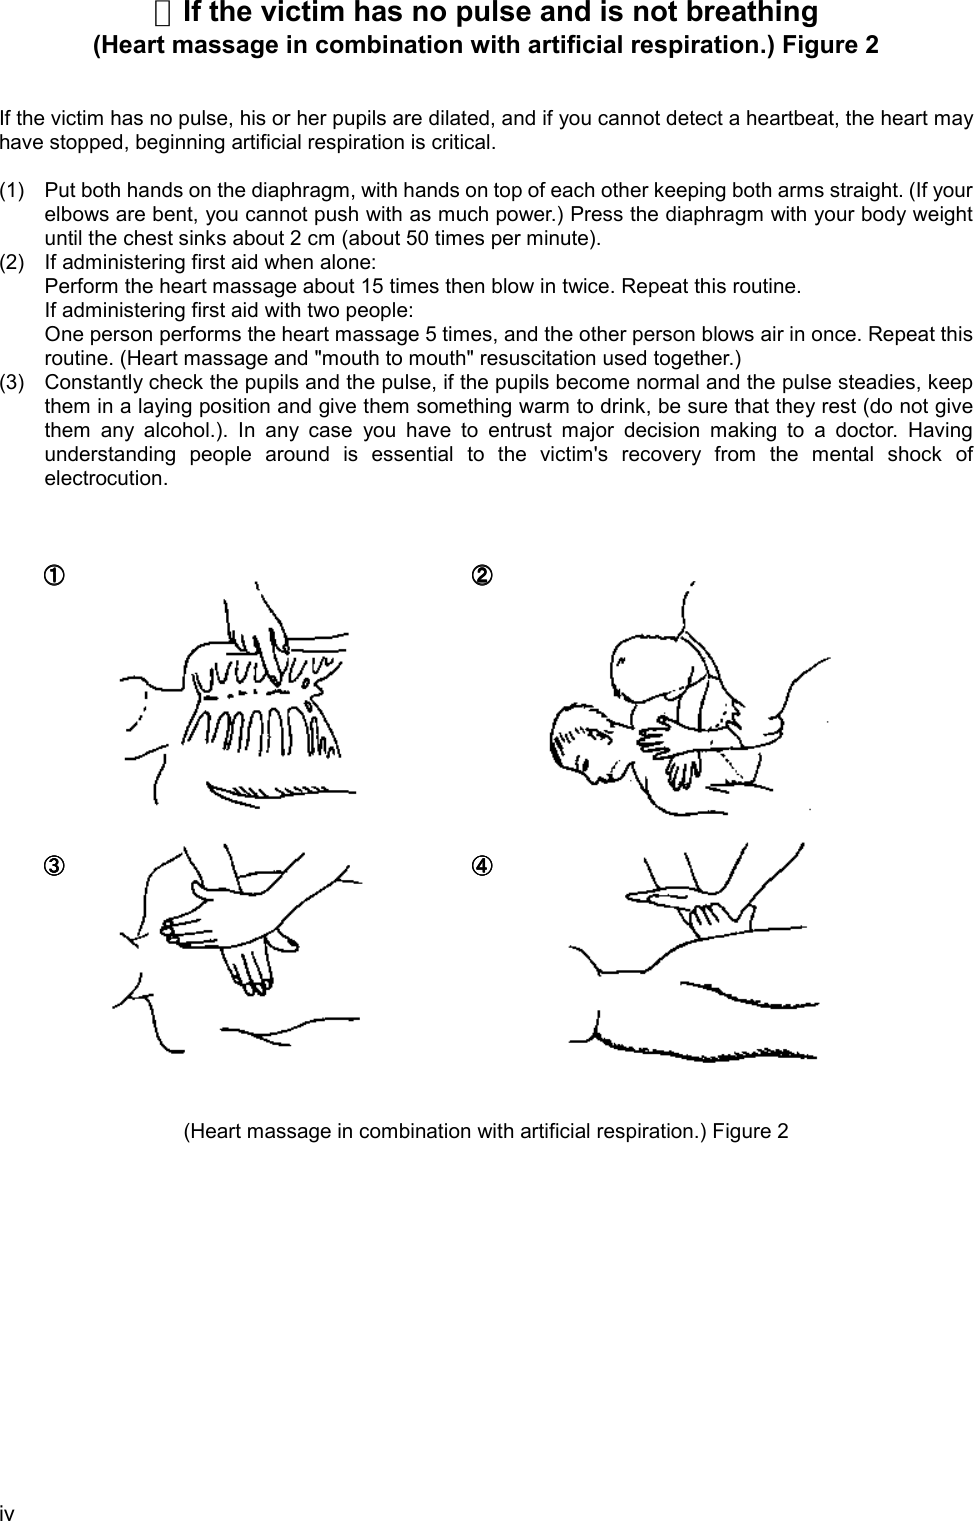 iv☆If the victim has no pulse and is not breathing(Heart massage in combination with artificial respiration.) Figure 2If the victim has no pulse, his or her pupils are dilated, and if you cannot detect a heartbeat, the heart mayhave stopped, beginning artificial respiration is critical.(1) Put both hands on the diaphragm, with hands on top of each other keeping both arms straight. (If yourelbows are bent, you cannot push with as much power.) Press the diaphragm with your body weightuntil the chest sinks about 2 cm (about 50 times per minute).(2) If administering first aid when alone:Perform the heart massage about 15 times then blow in twice. Repeat this routine.If administering first aid with two people:One person performs the heart massage 5 times, and the other person blows air in once. Repeat thisroutine. (Heart massage and &quot;mouth to mouth&quot; resuscitation used together.)(3) Constantly check the pupils and the pulse, if the pupils become normal and the pulse steadies, keepthem in a laying position and give them something warm to drink, be sure that they rest (do not givethem any alcohol.). In any case you have to entrust major decision making to a doctor. Havingunderstanding people around is essential to the victim&apos;s recovery from the mental shock ofelectrocution.①①①①②②②②③③③③④④④④(Heart massage in combination with artificial respiration.) Figure 2